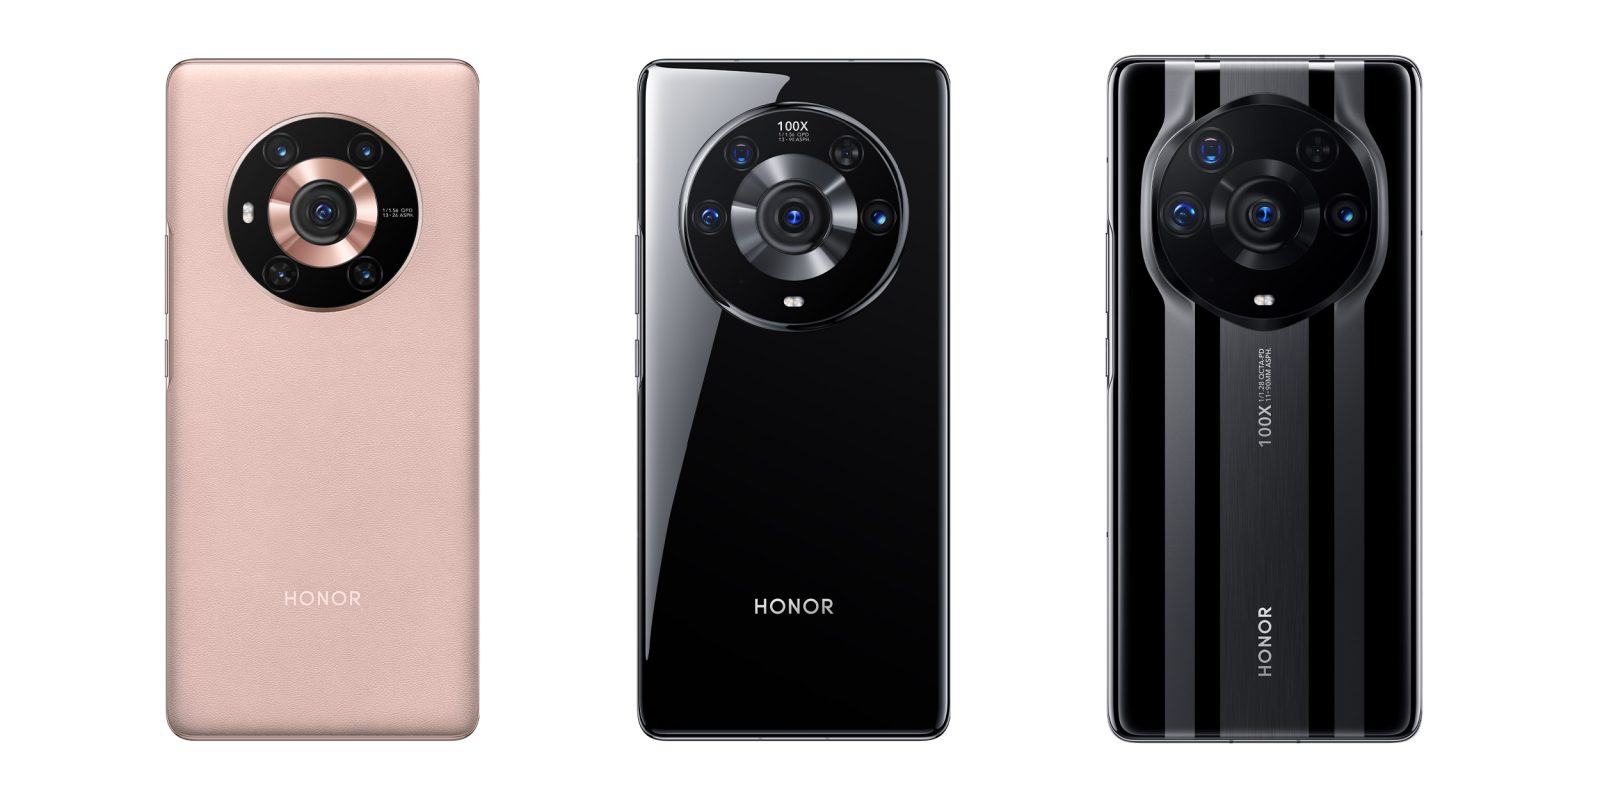 Honor Magic 3 series devices